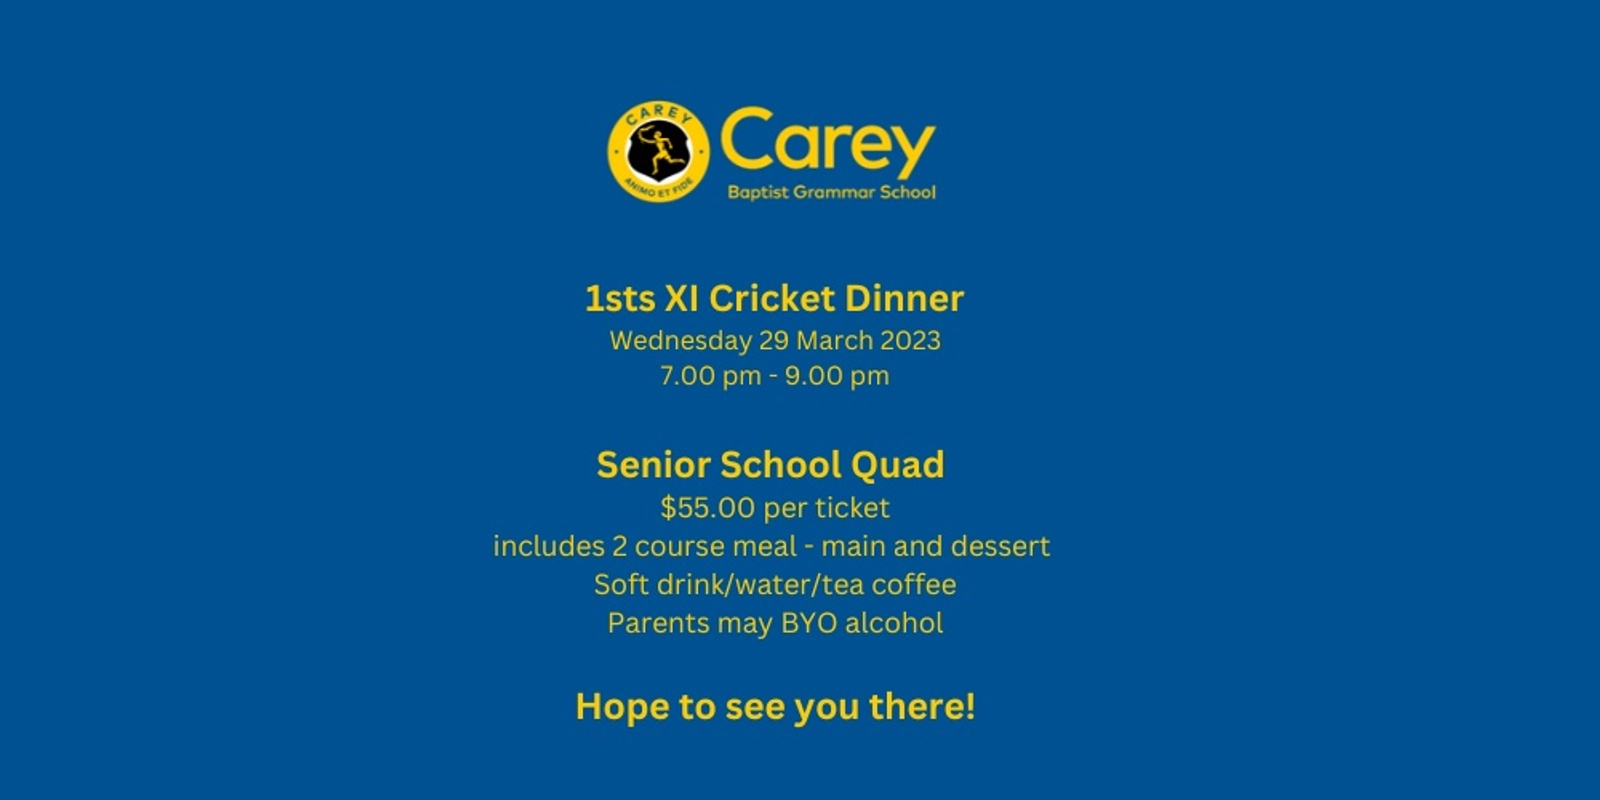 1sts XI Cricket Dinner